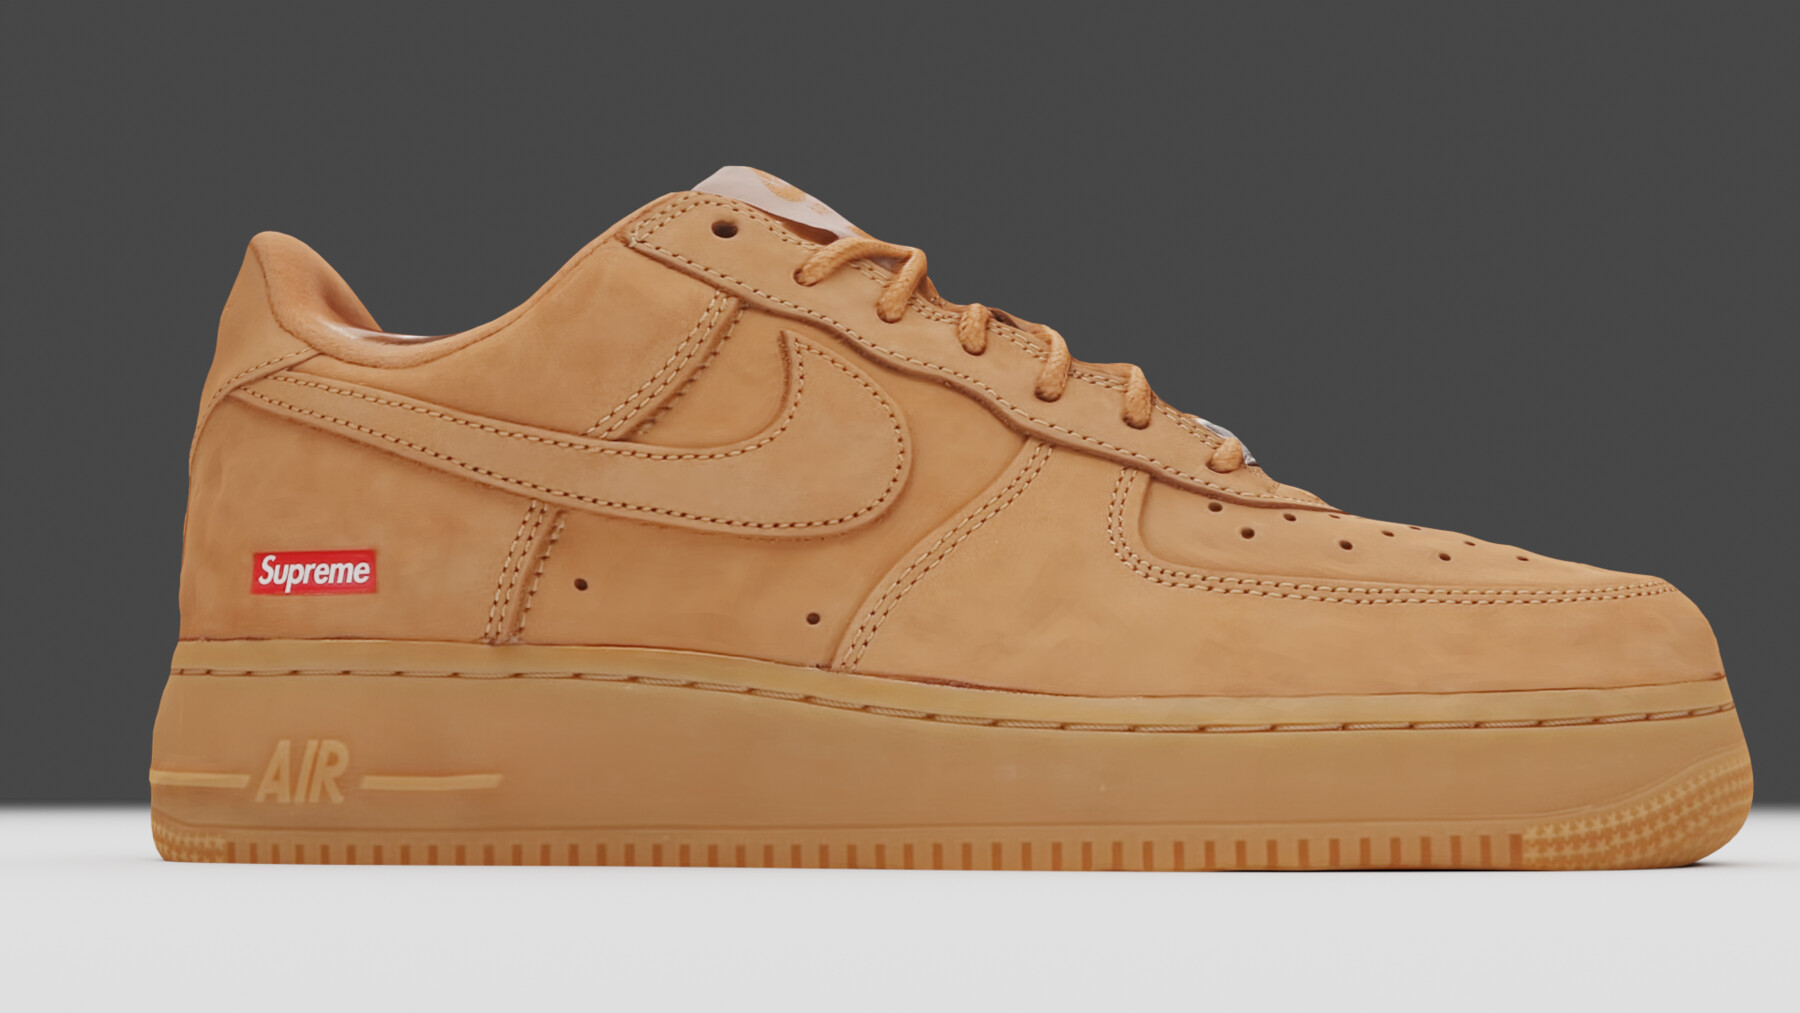 ArtStation   Nike Air Force 1 Low SP Supreme Wheat   Game Assets